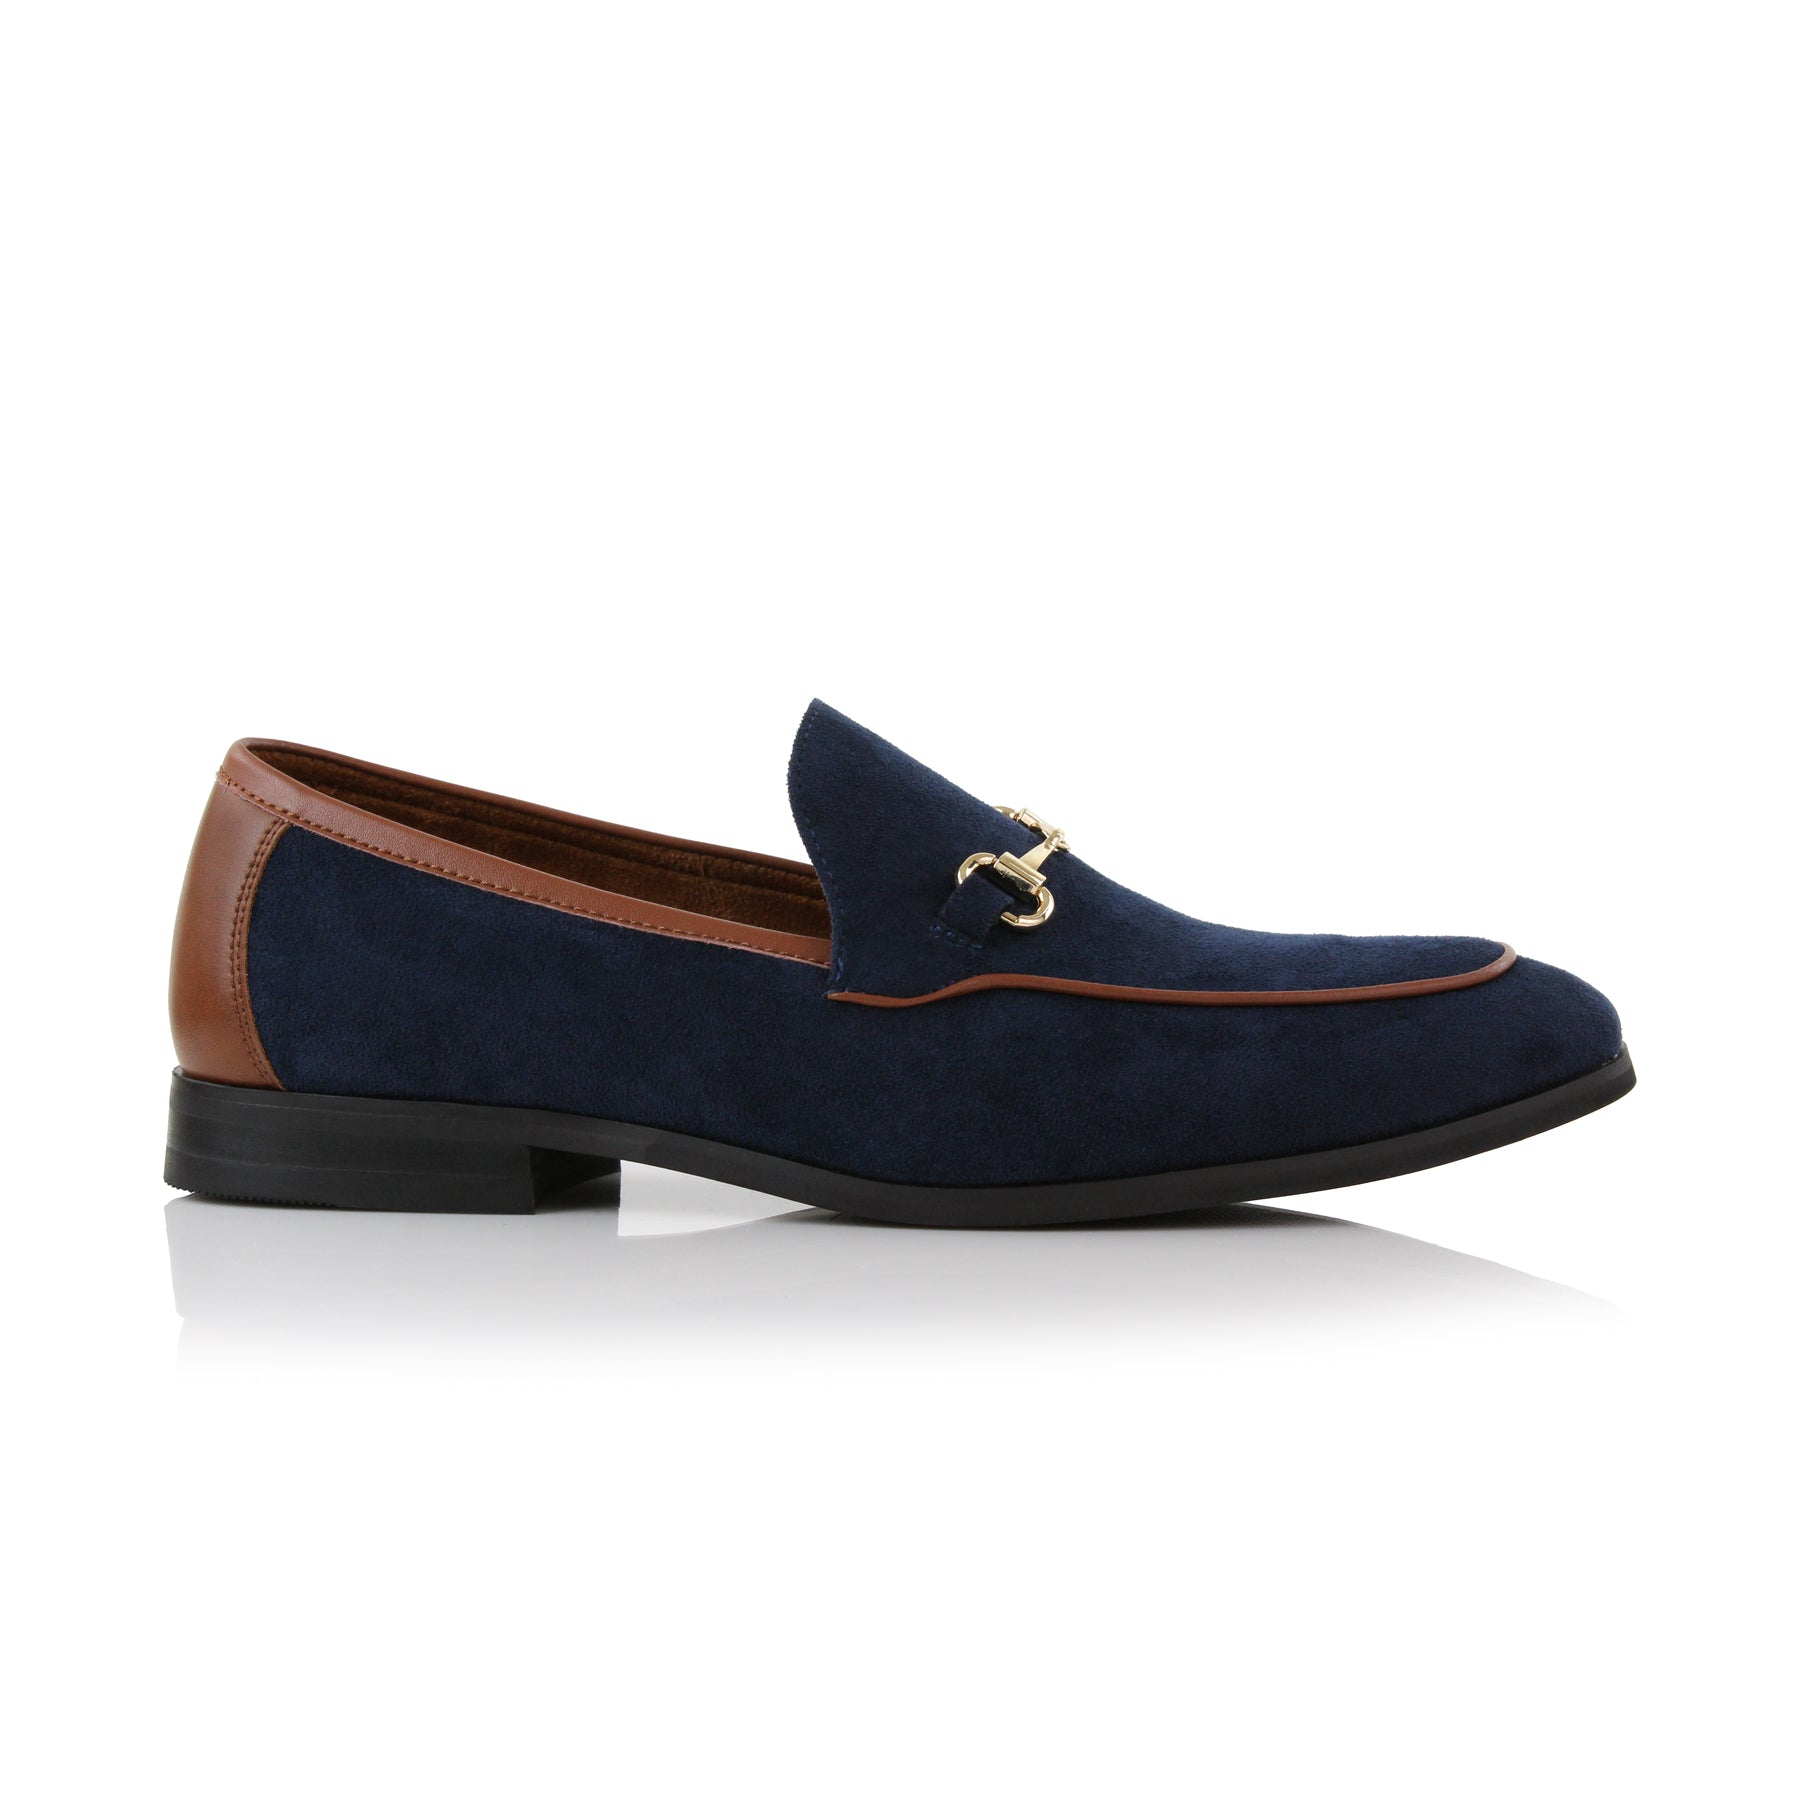 Buckled Suede Loafers | Dante by Ferro Aldo | Conal Footwear | Outer Side Angle View